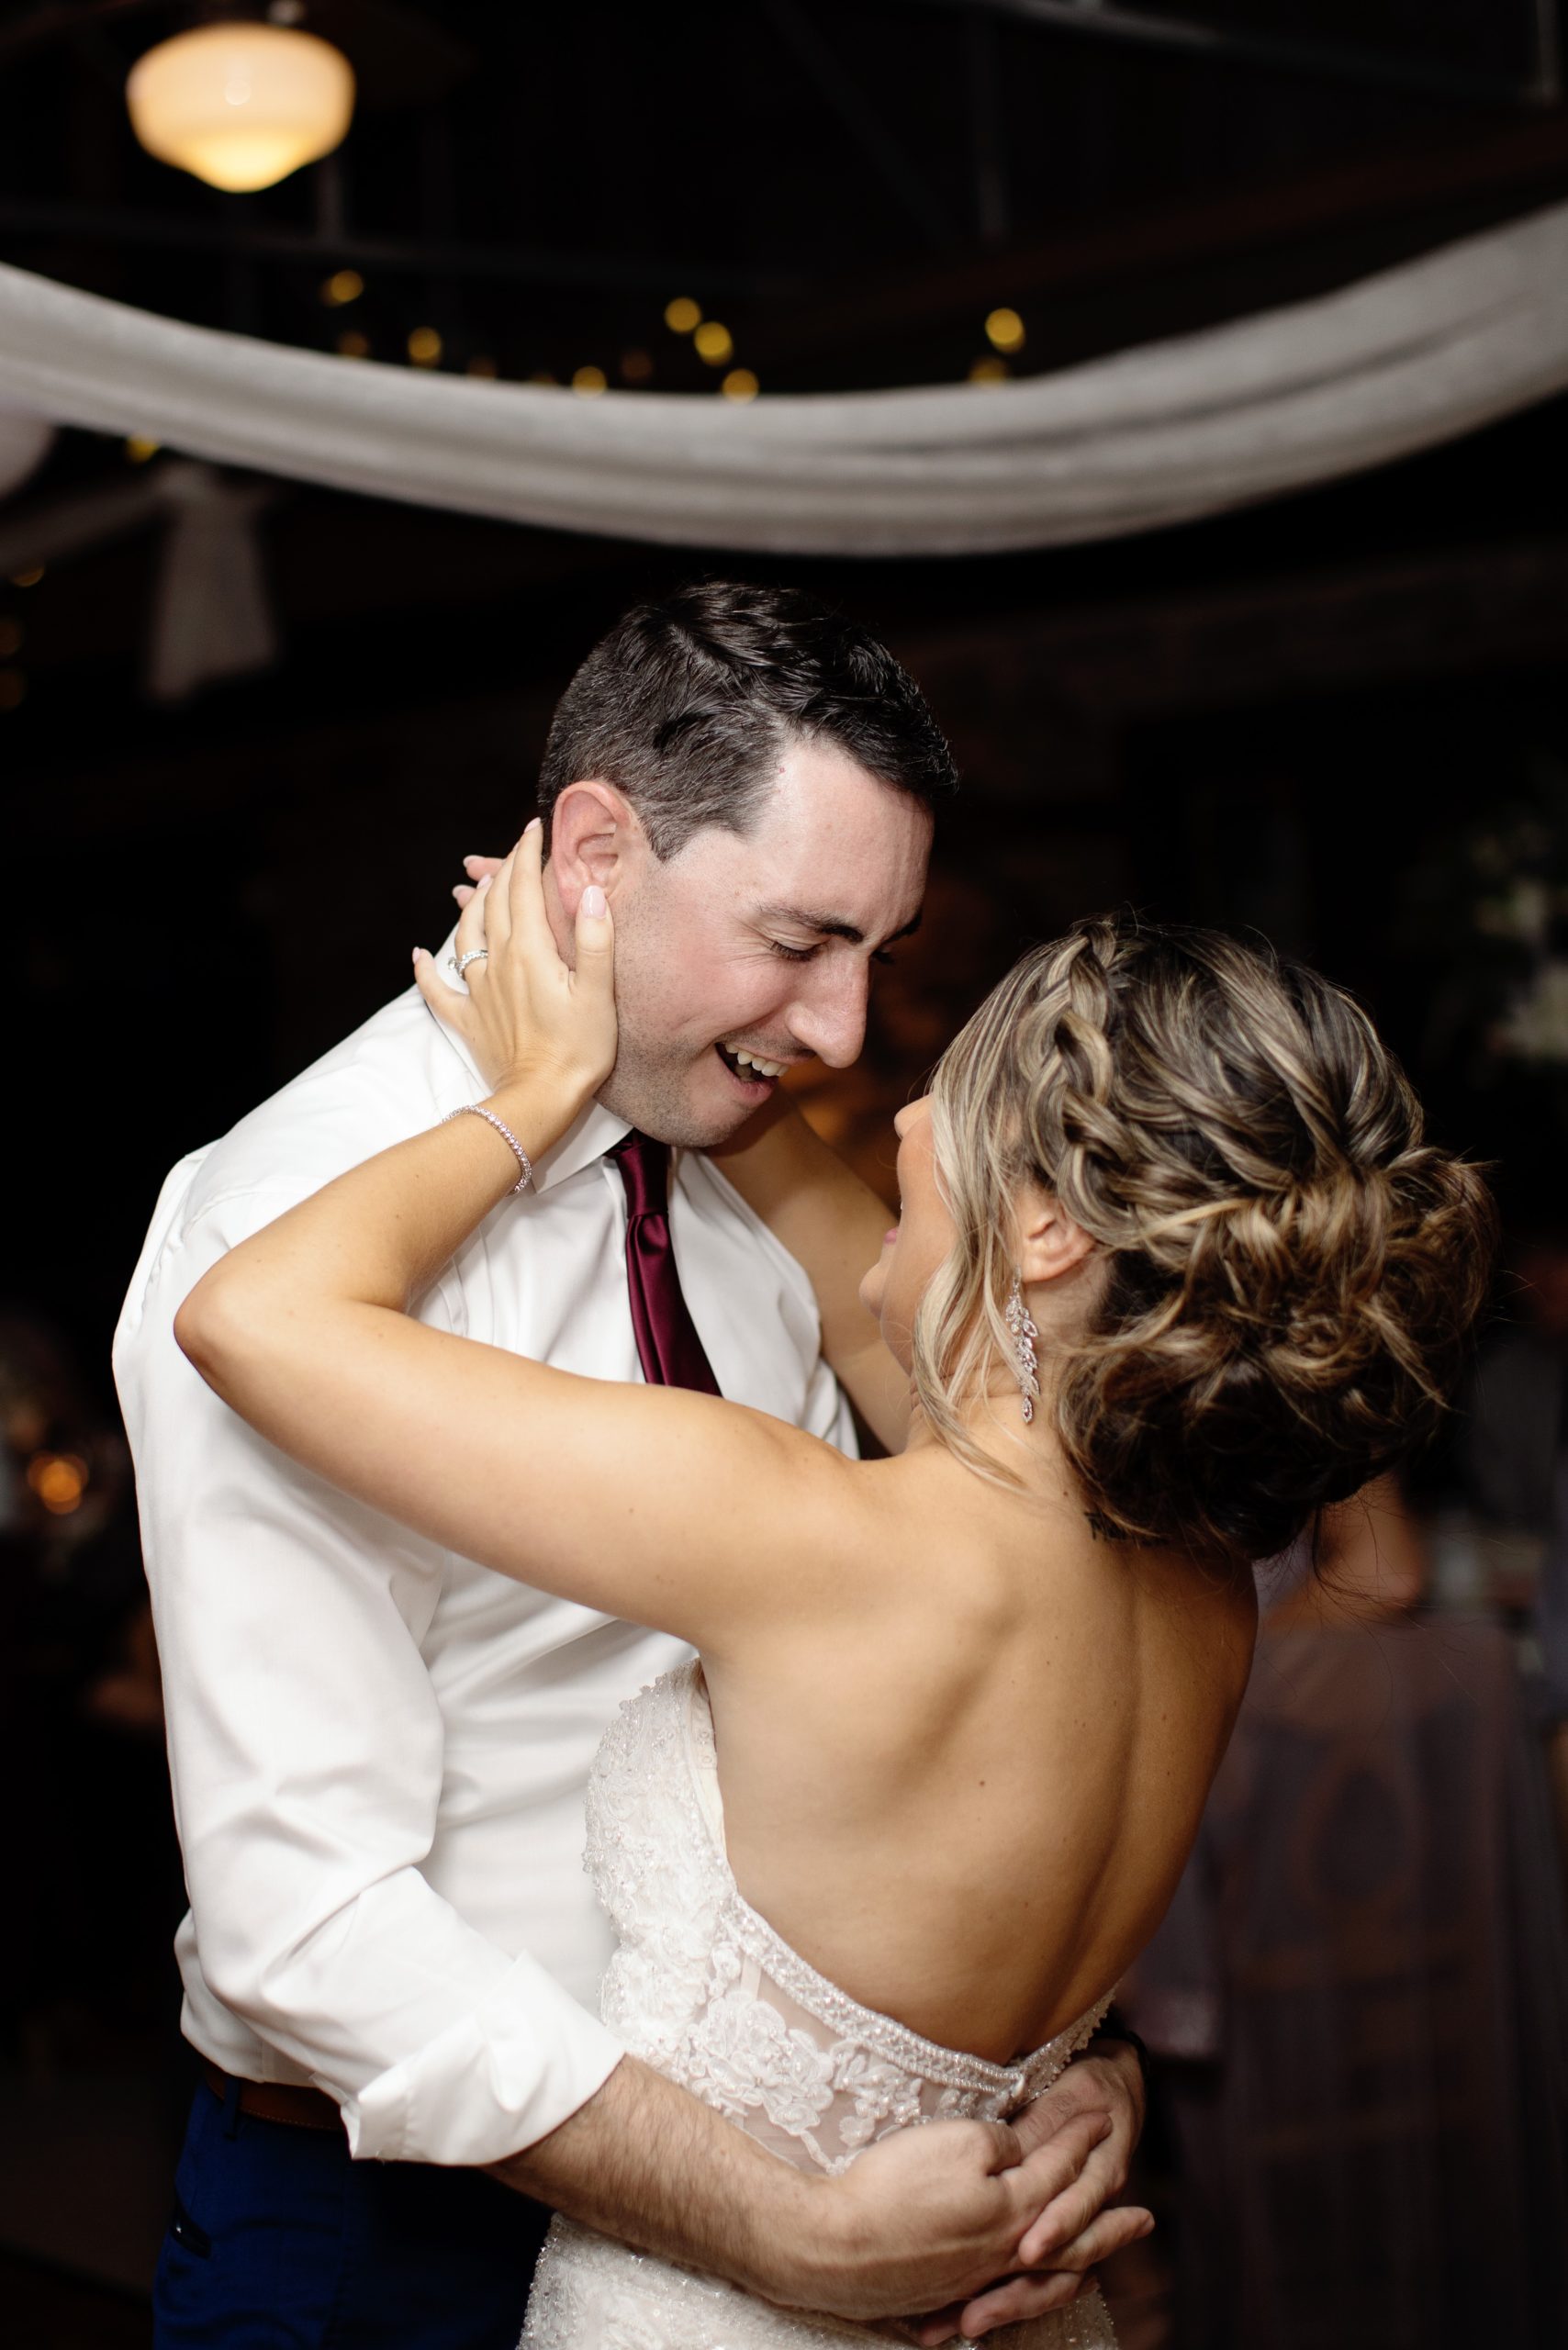 Carriage House Restaurant Wedding-East Greenville, Pa Wedding